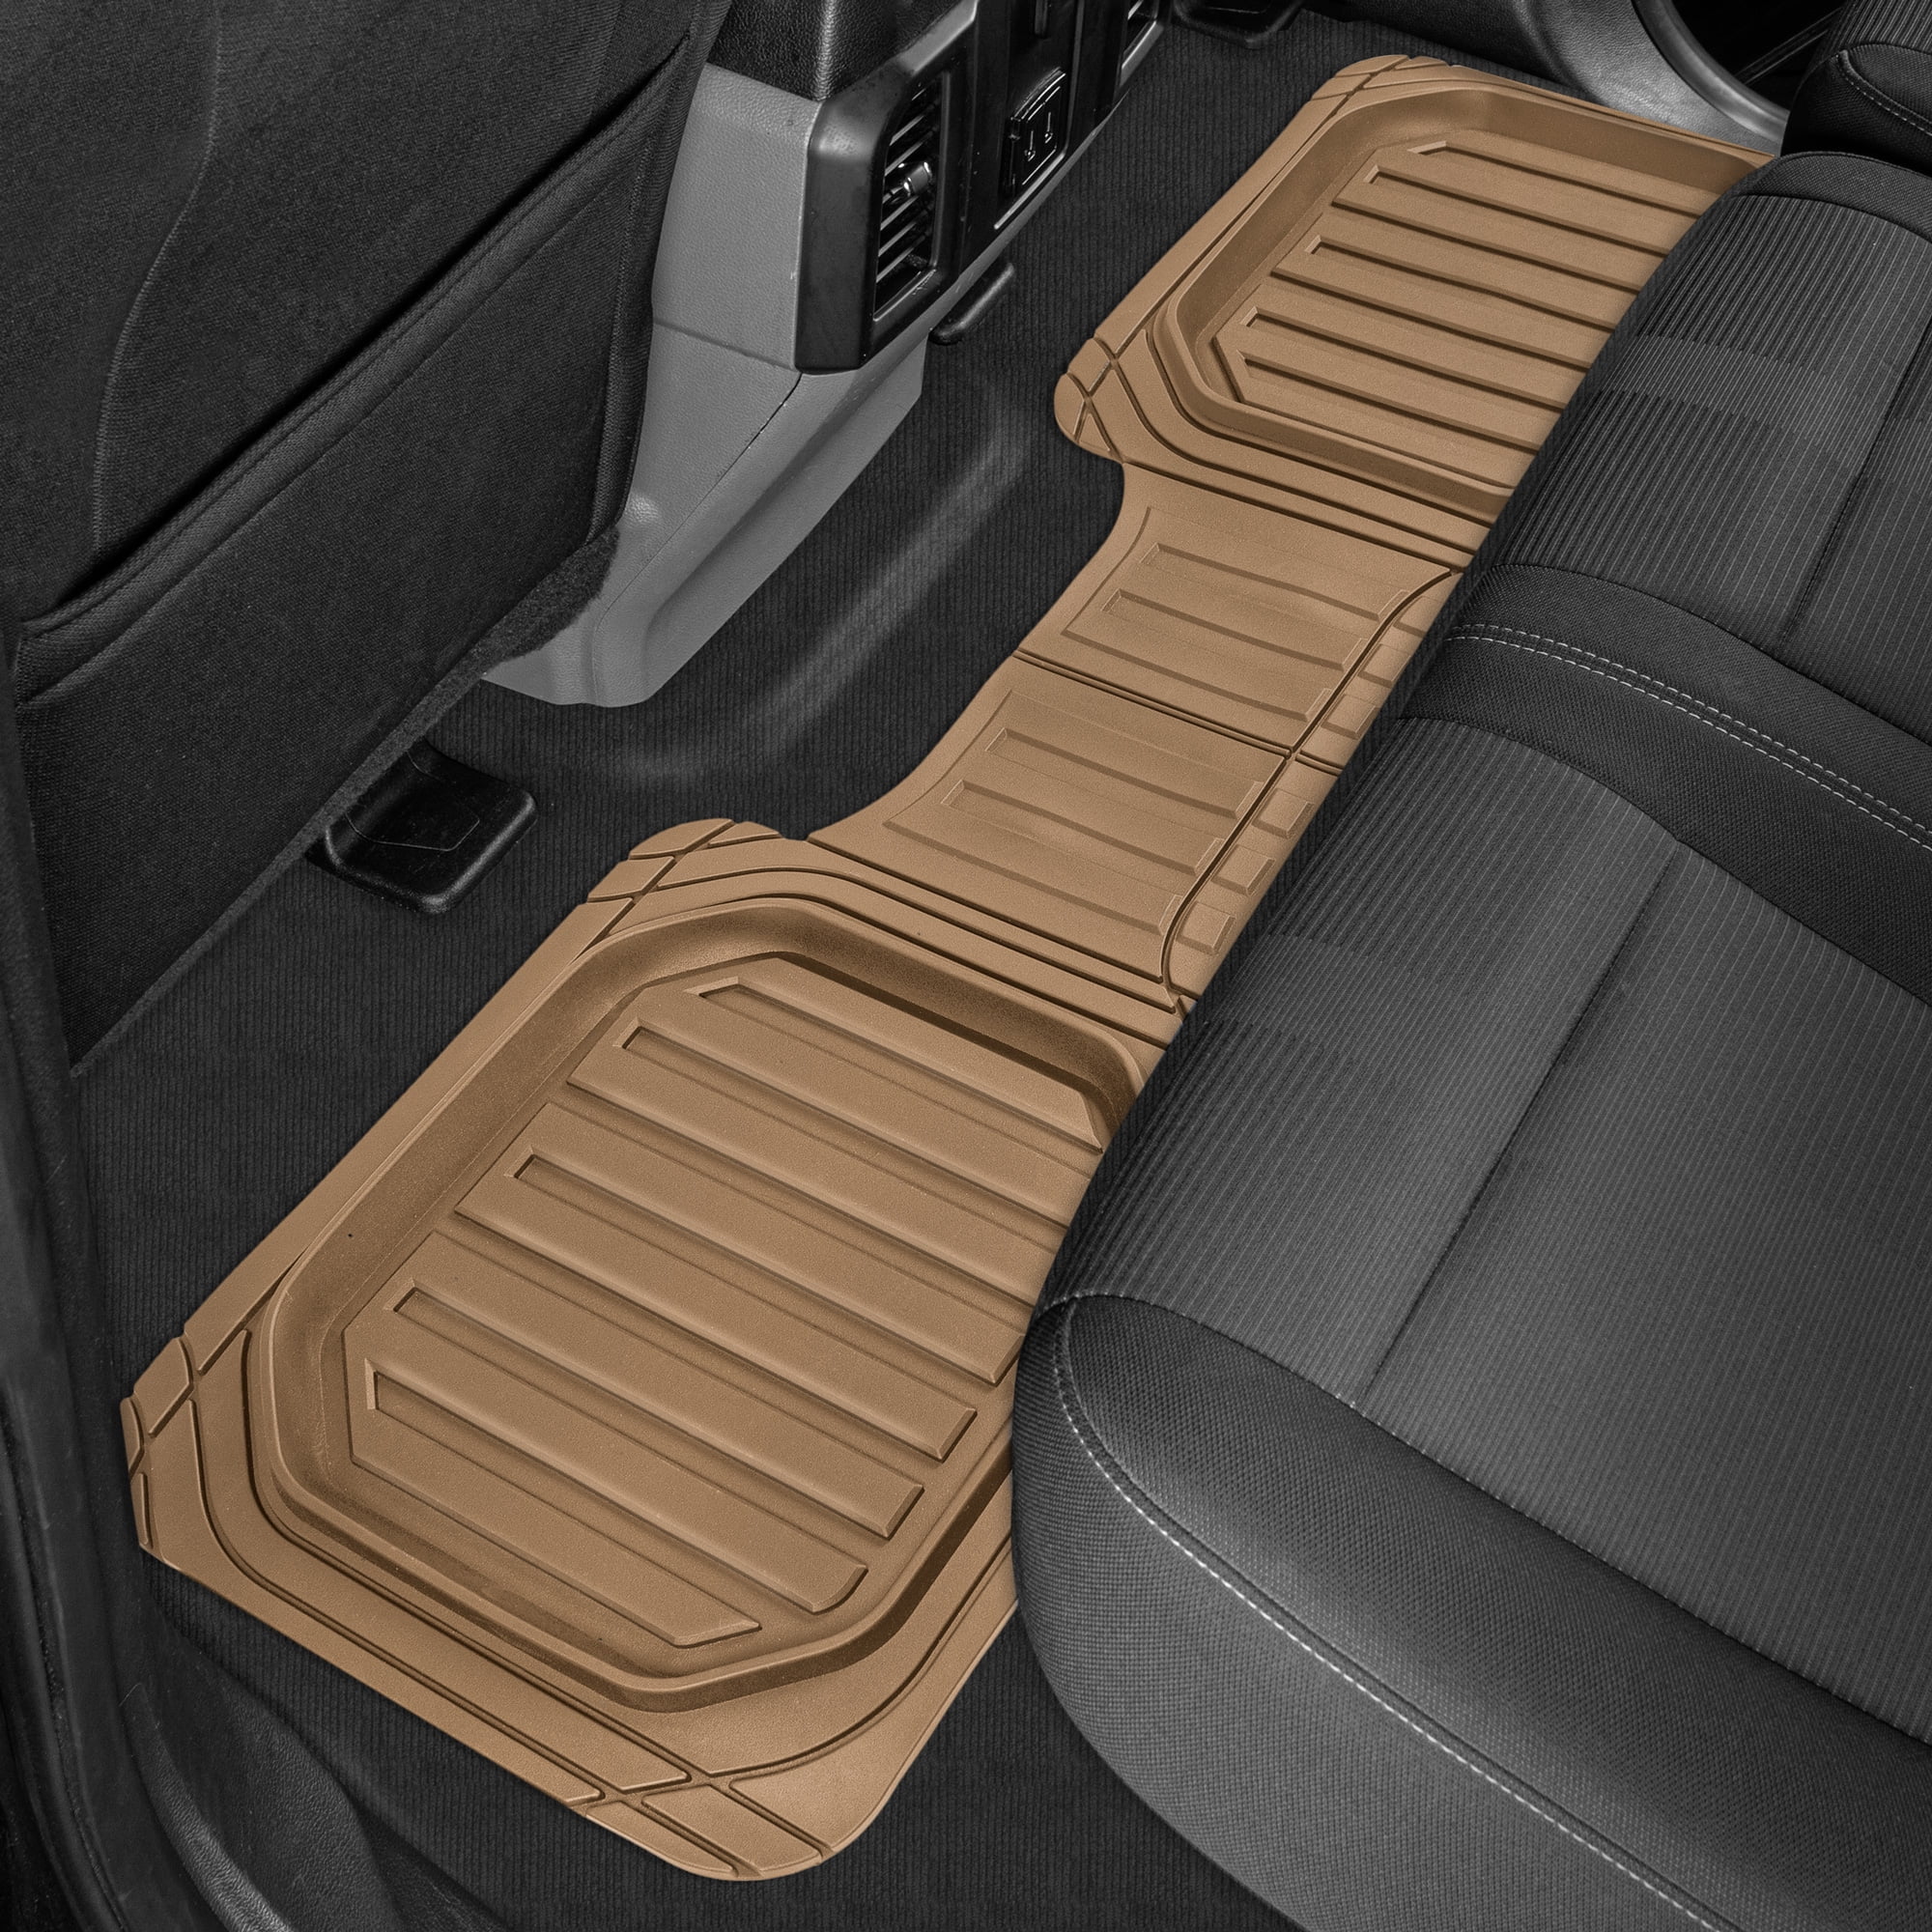 Heavy Duty All Weather Odorless BDK Caterpillar CAMT-1003 Universal Trim to Fit Front & Rear Combo Set for Car Sedan SUV Van Deep Dish Rubber Car Floor Mats with Trunk Cargo Liner 3-Piece 